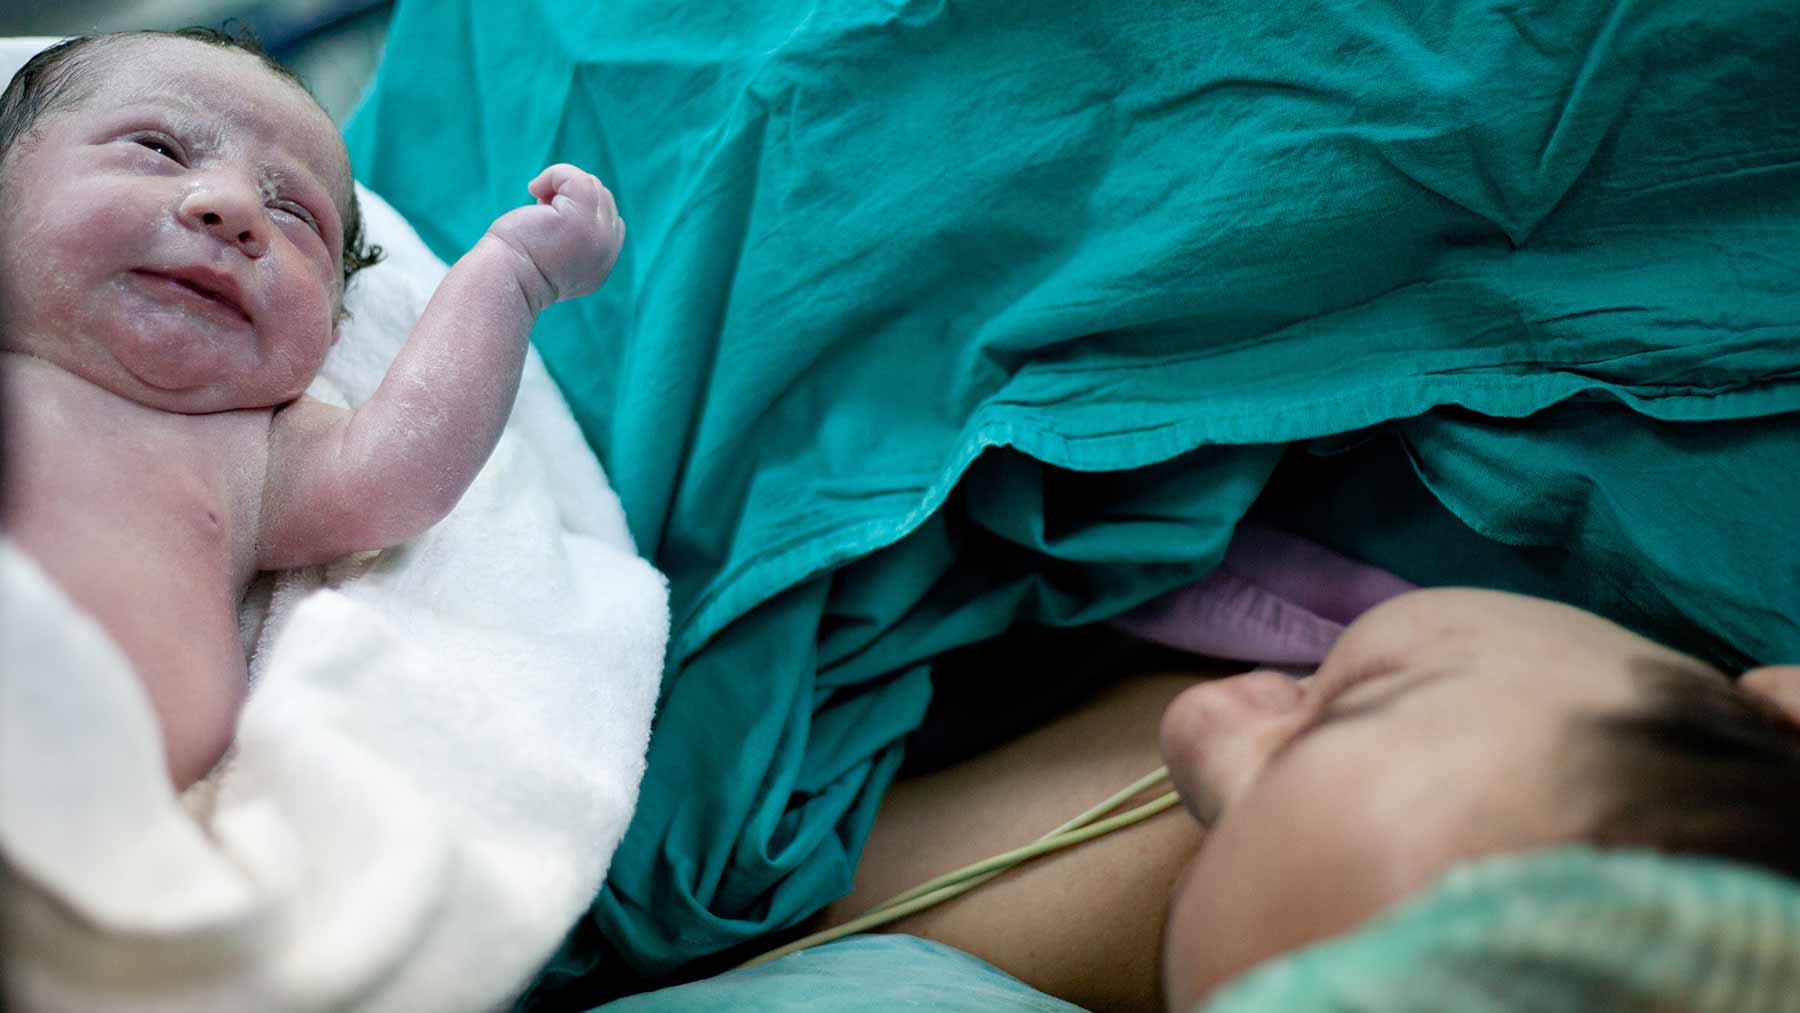 All about C-sections: Before, during and after